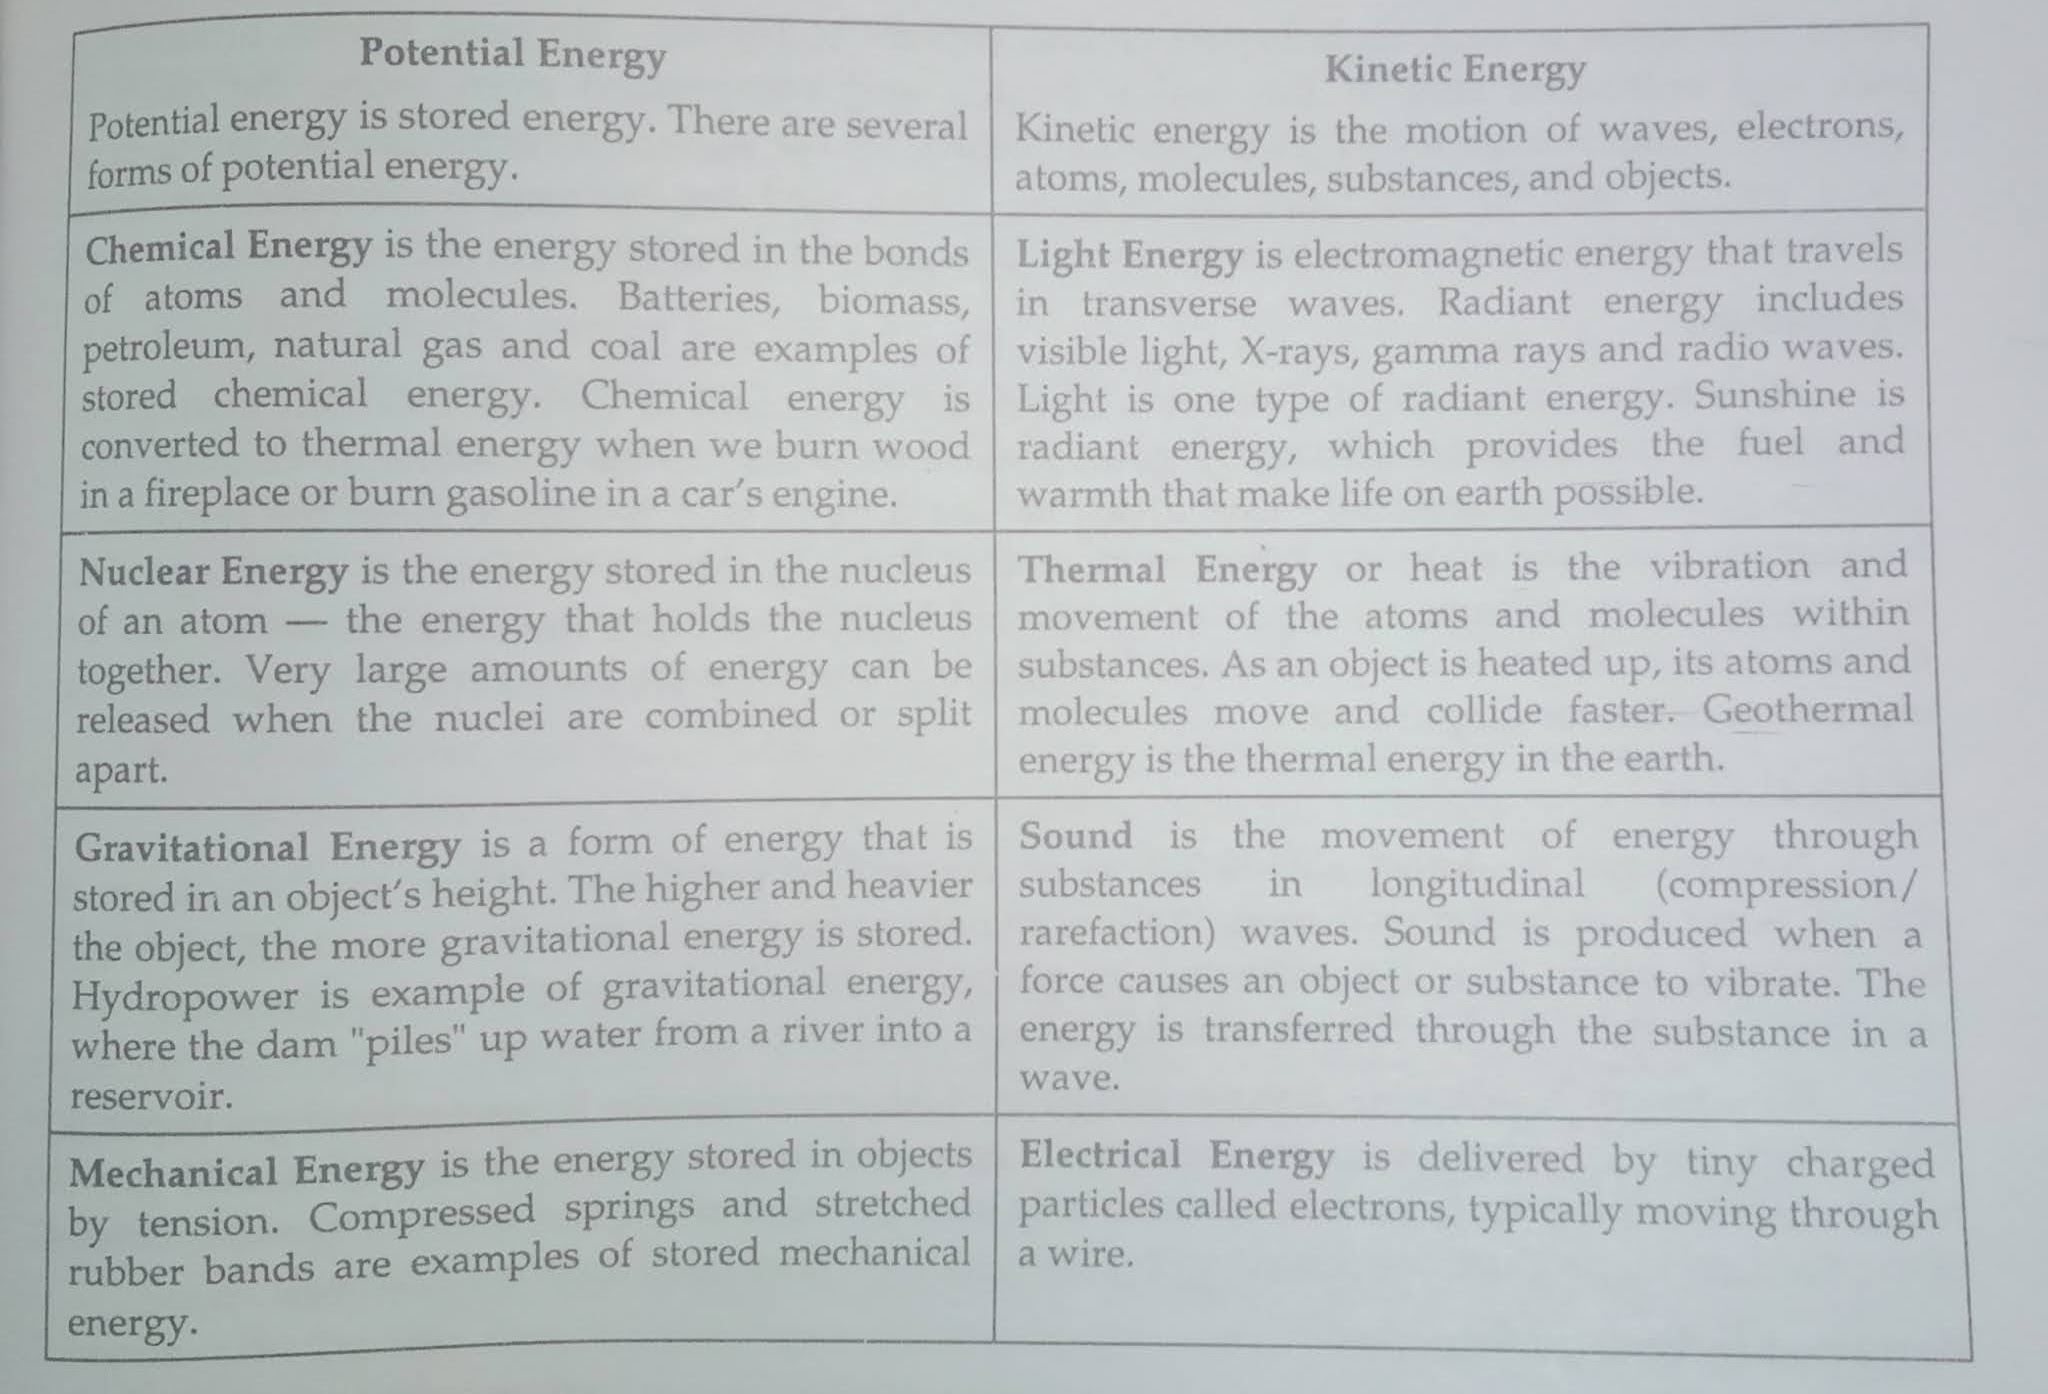 definition-of-energy-and-two-major-forms-are-kinetic-energy-and